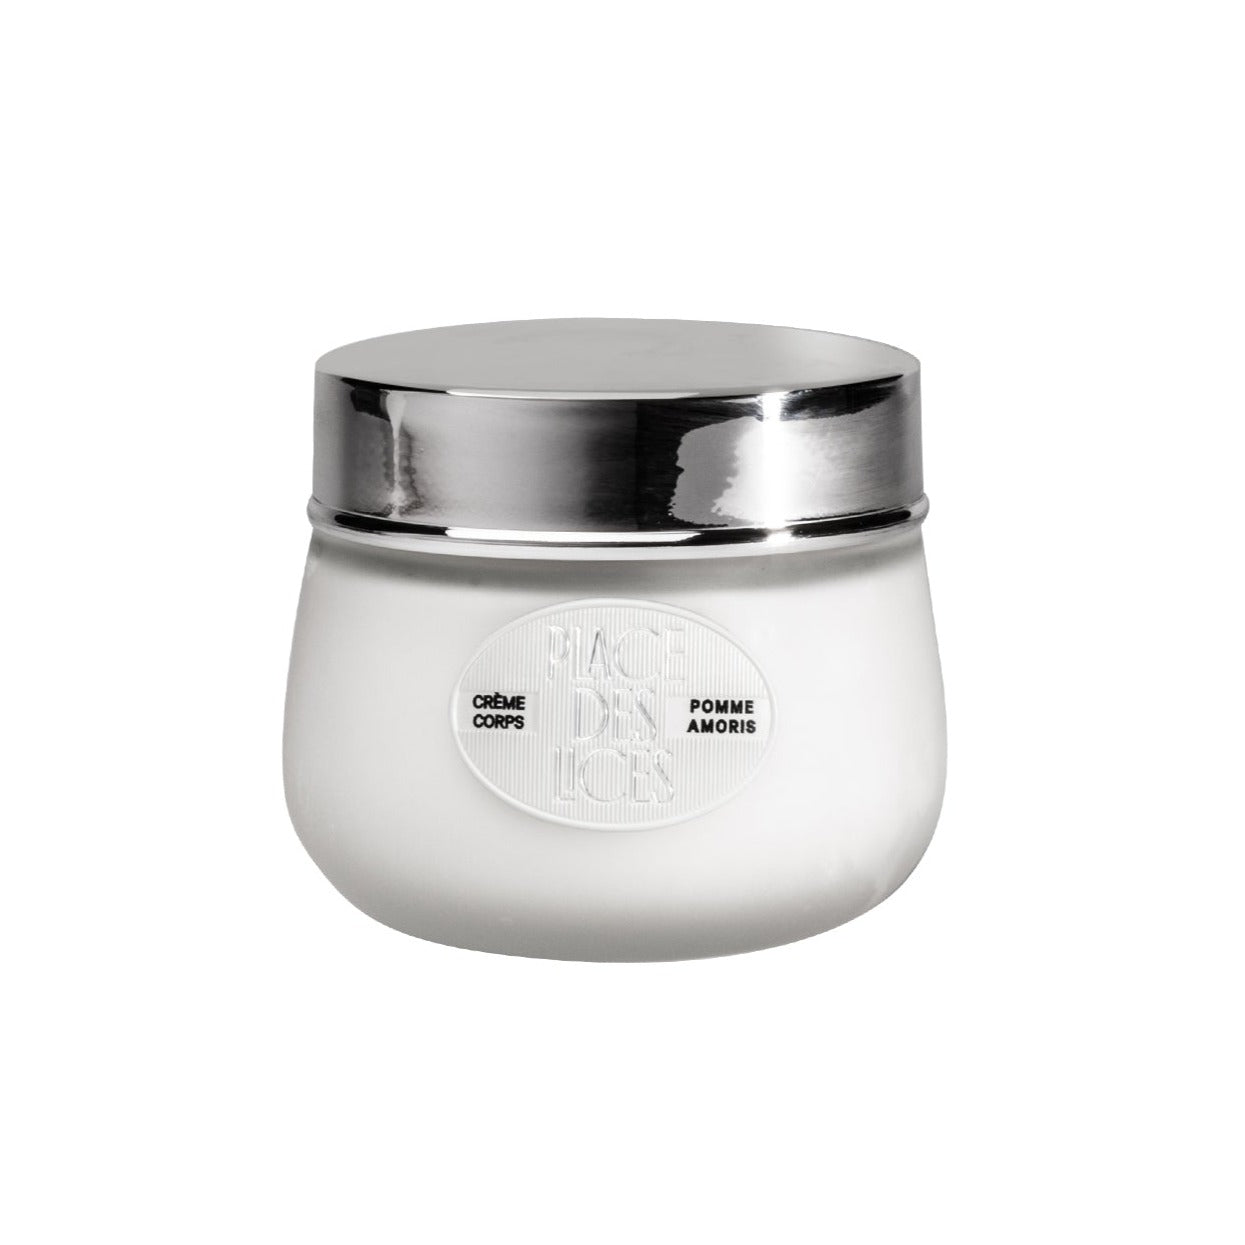 Pomme Amoris Body Cream 200ml by Place des Lices